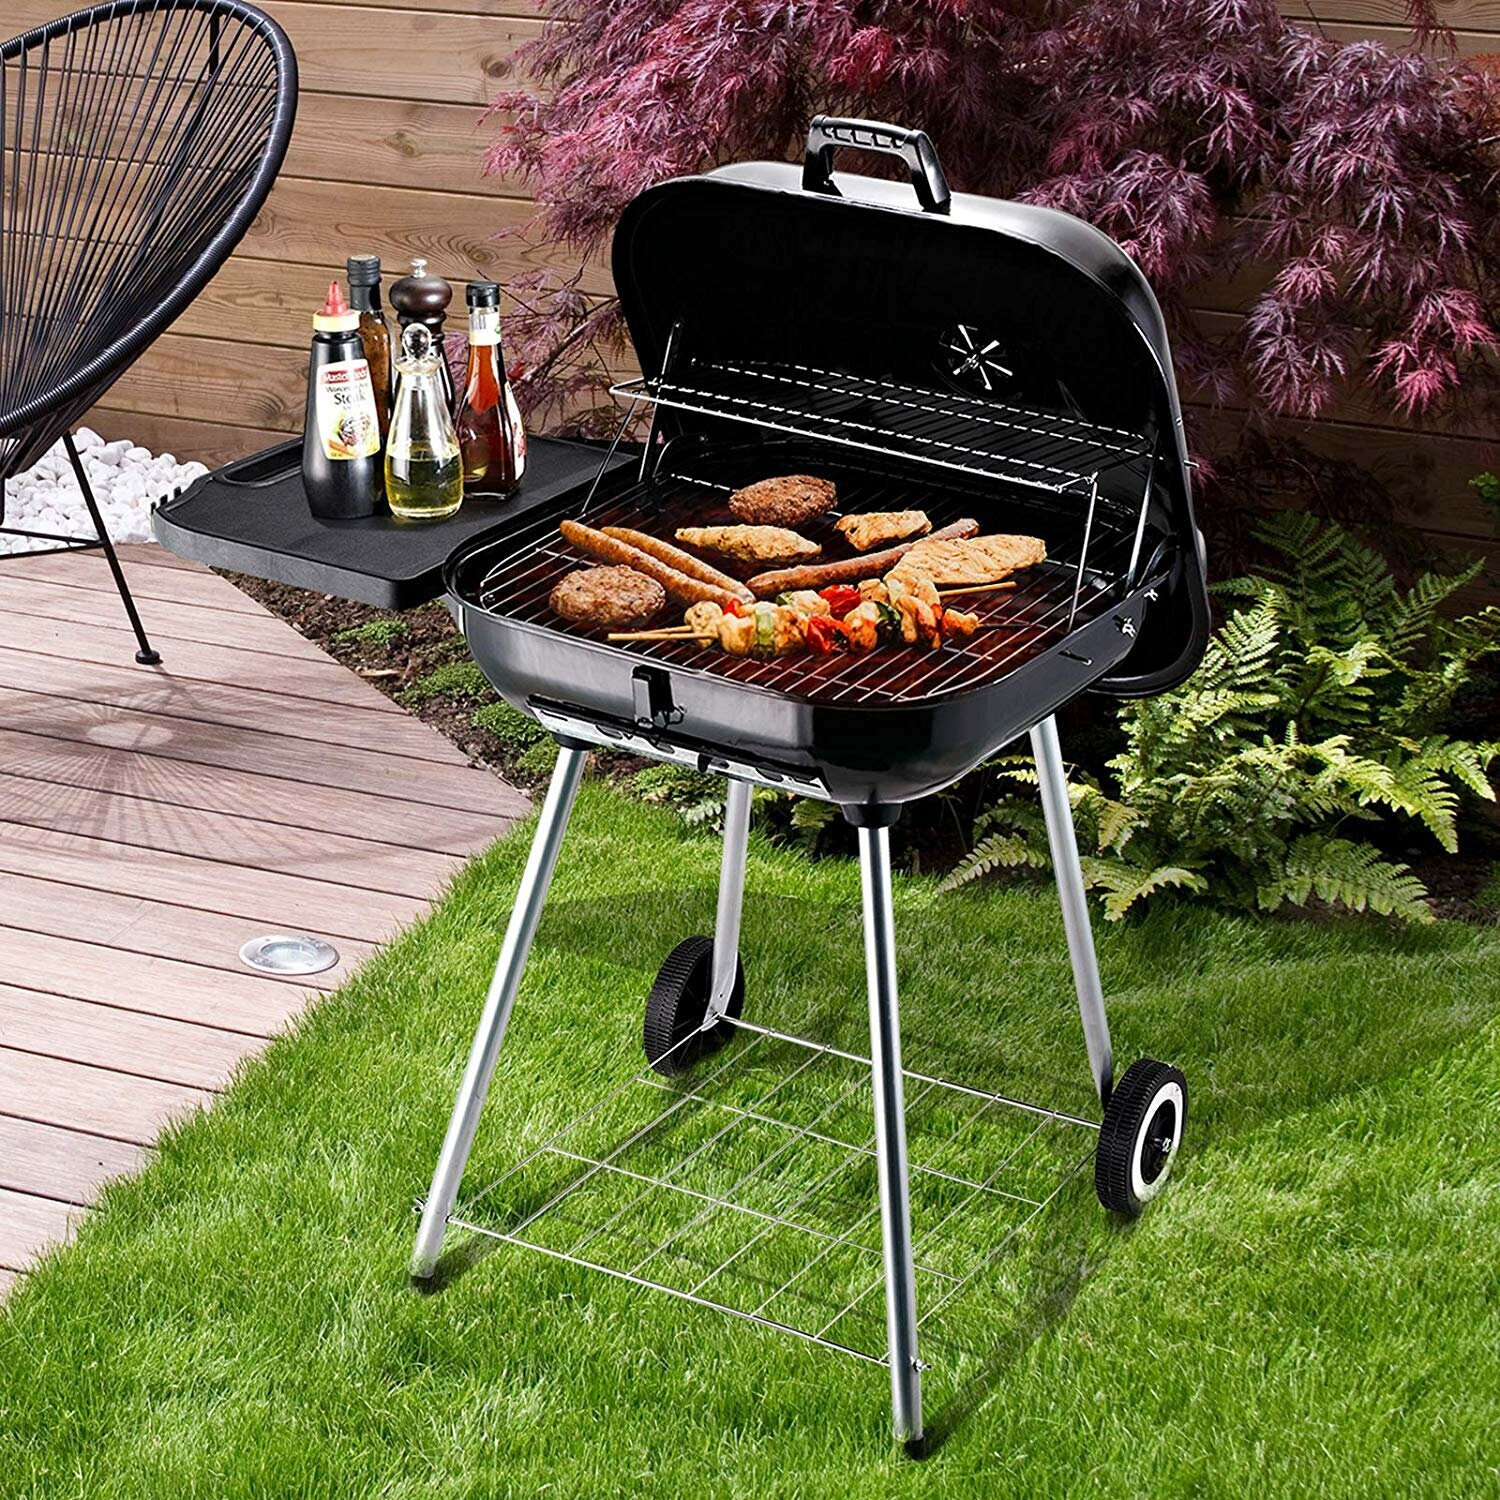 Portable Compact Camping Grill with Side Tray